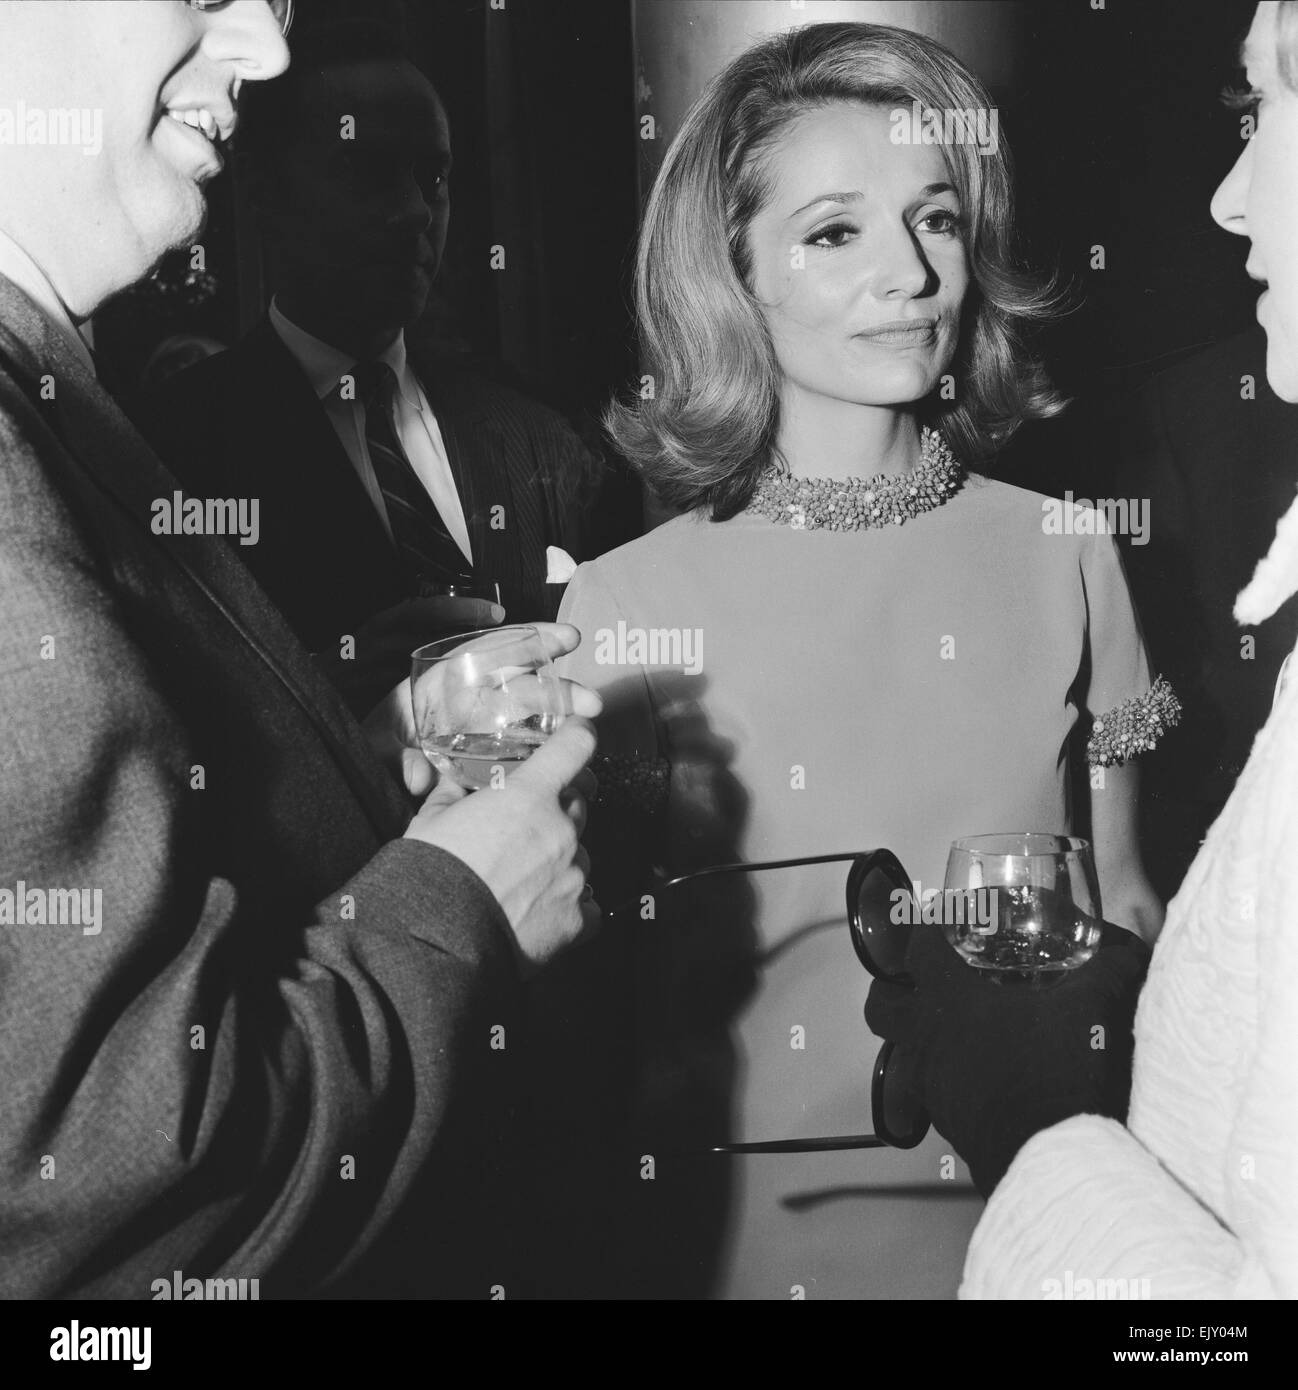 Lee Bouvier, actress & sister of Jacqueline Kennedy Onassis, pictured at  The Savoy Hotel in London 19th September 1967. Lee Bouvier 34 is in London  for her TV acting debut in David